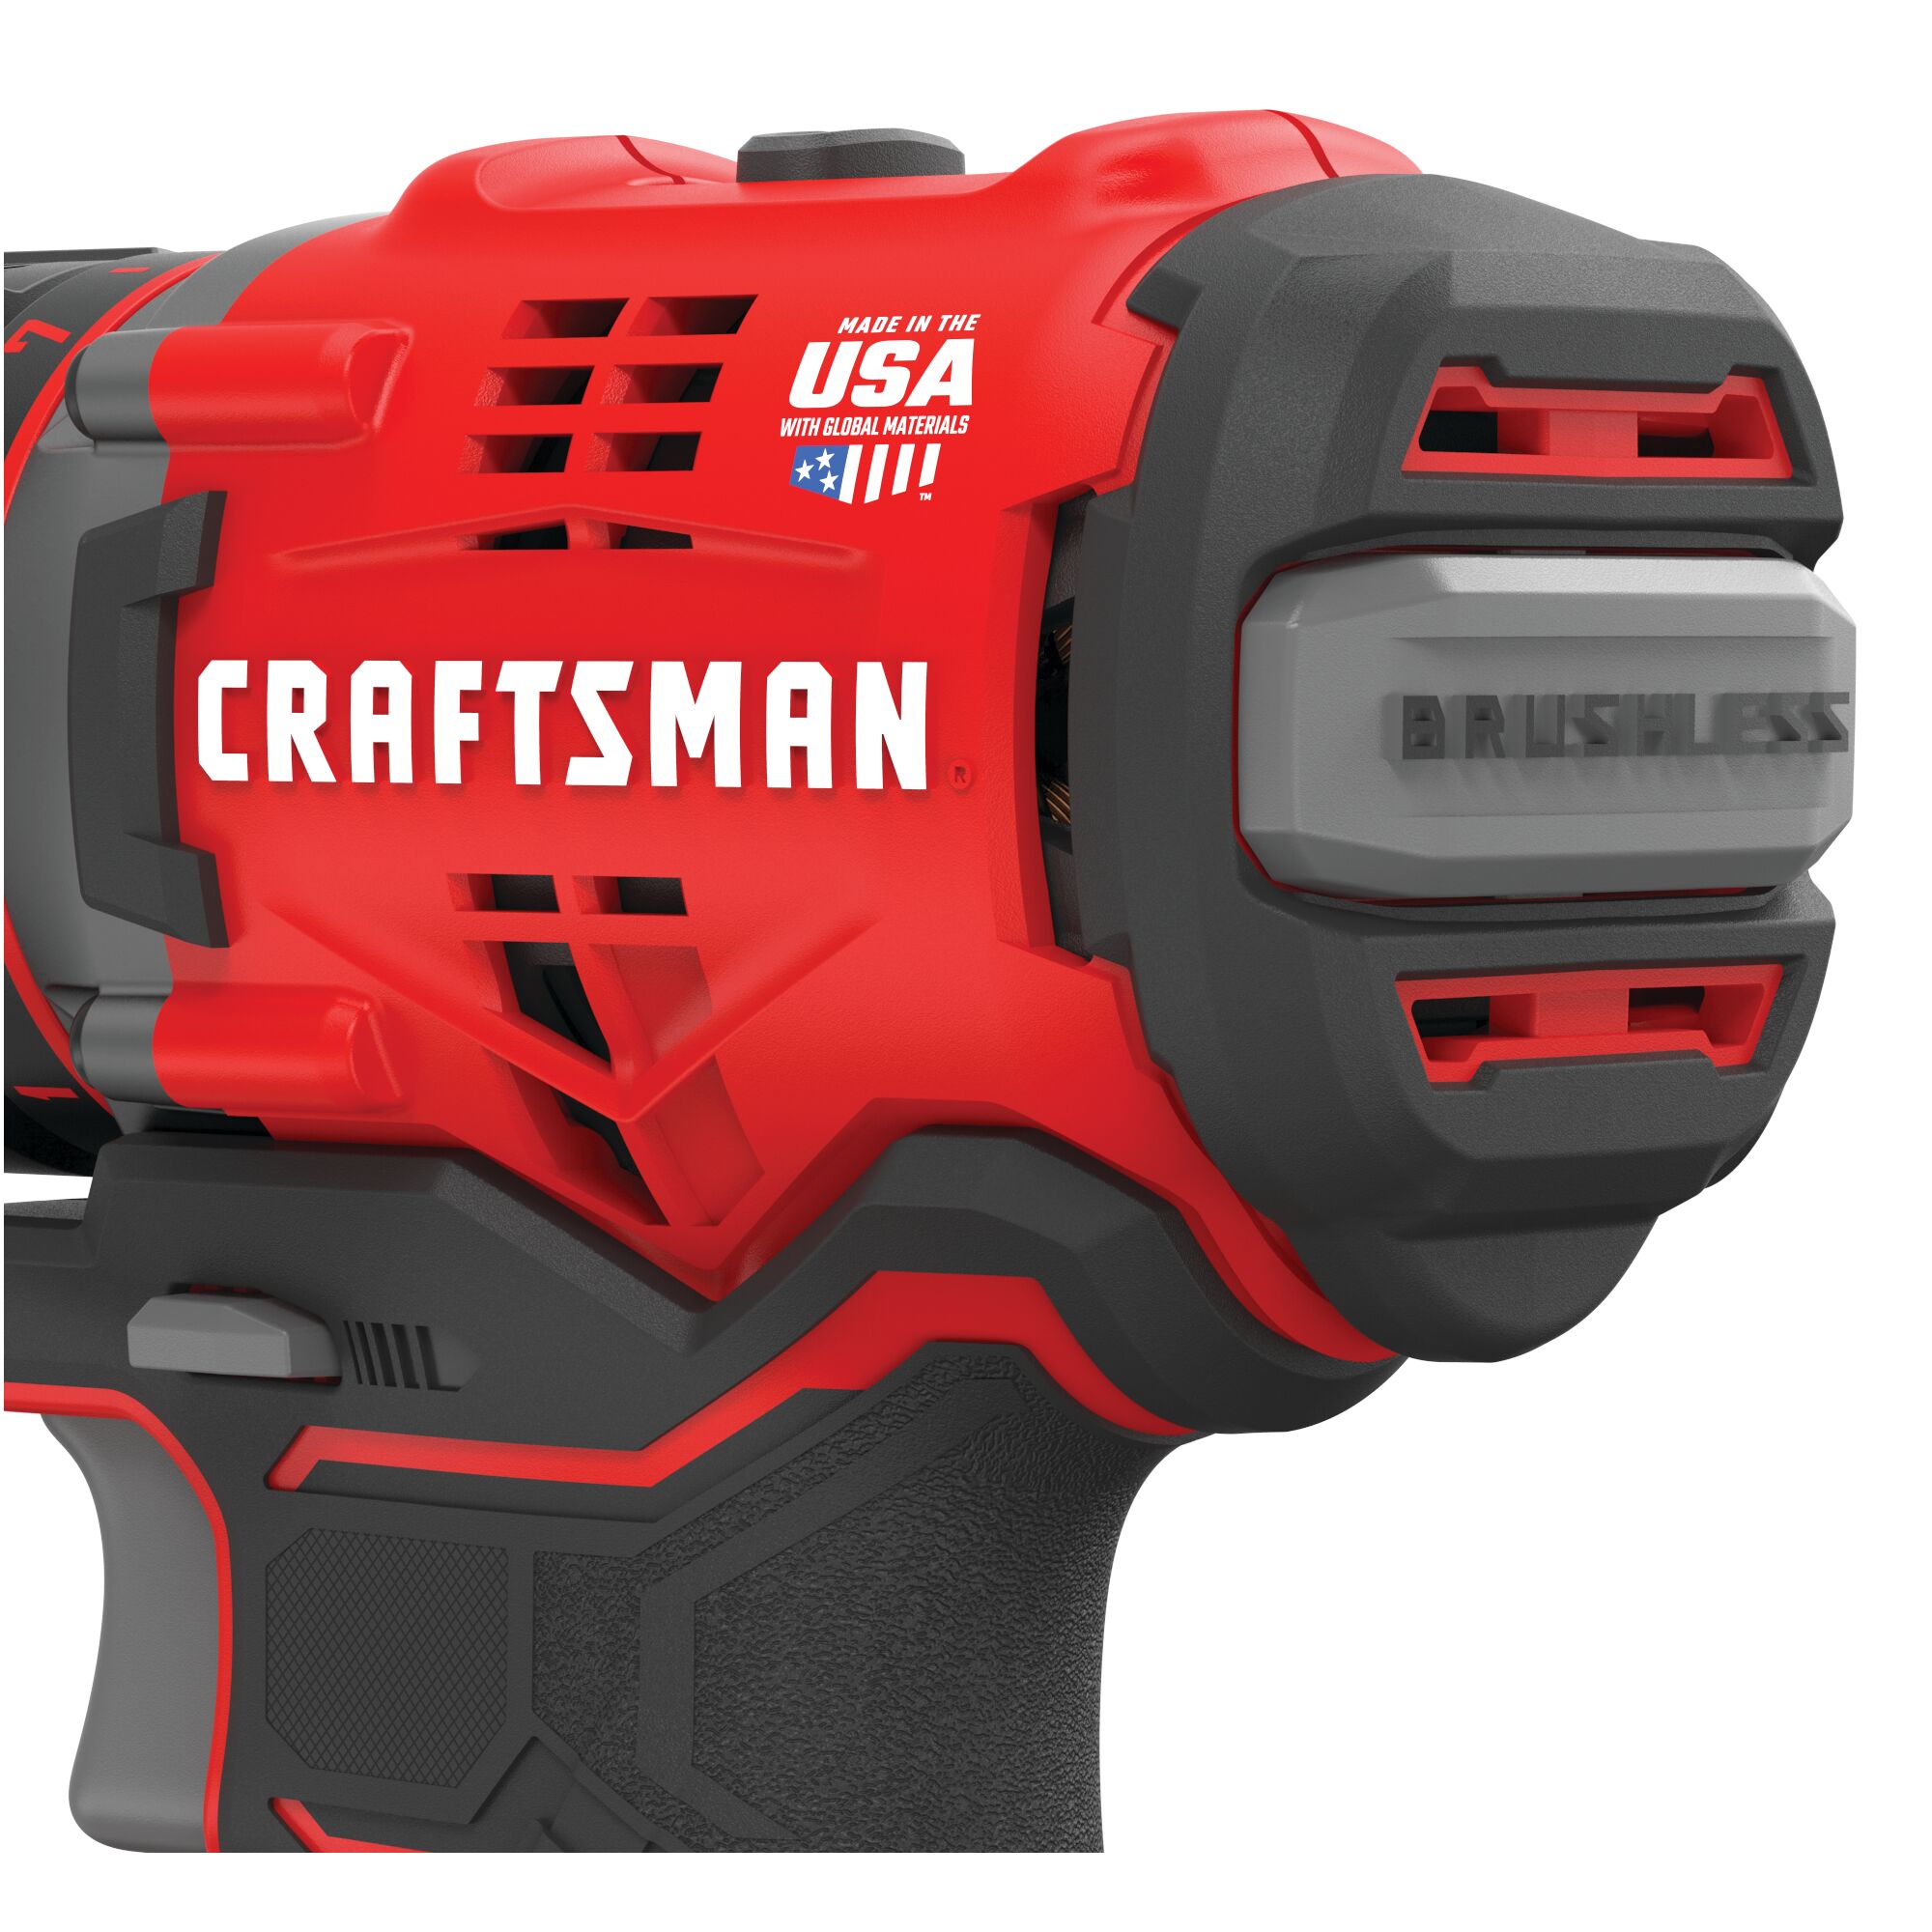 View of CRAFTSMAN Drills: Compact highlighting product features